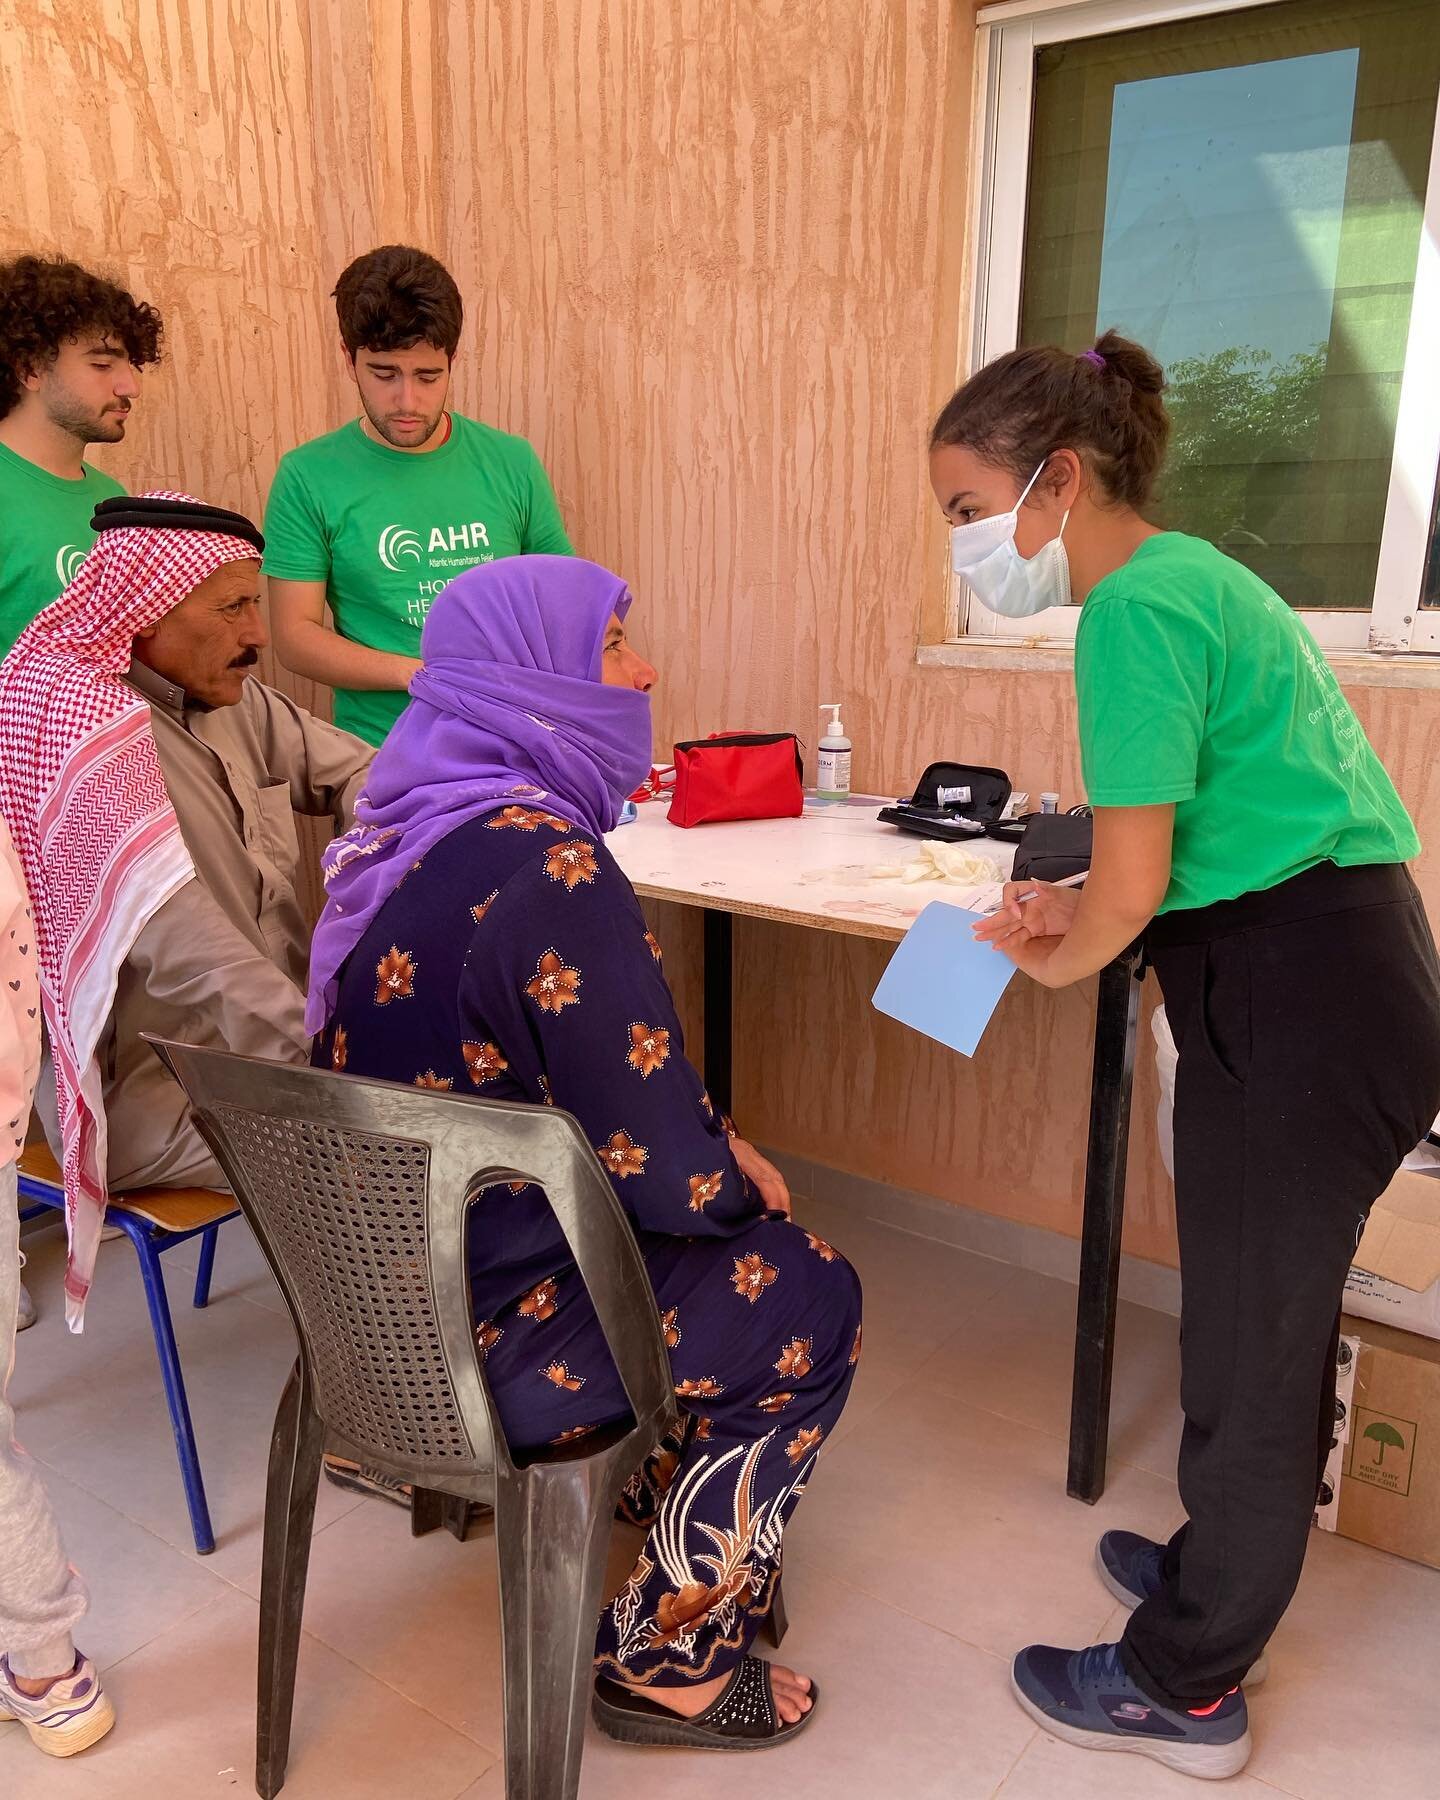 @atlantichumanitarianrelief at the Azraq Center doing their magic!

The family of the Azraq Education and Community Fund would like to thank the medical staff from Atlantic Humanitarian Relief for their constant visits and for their help and support 